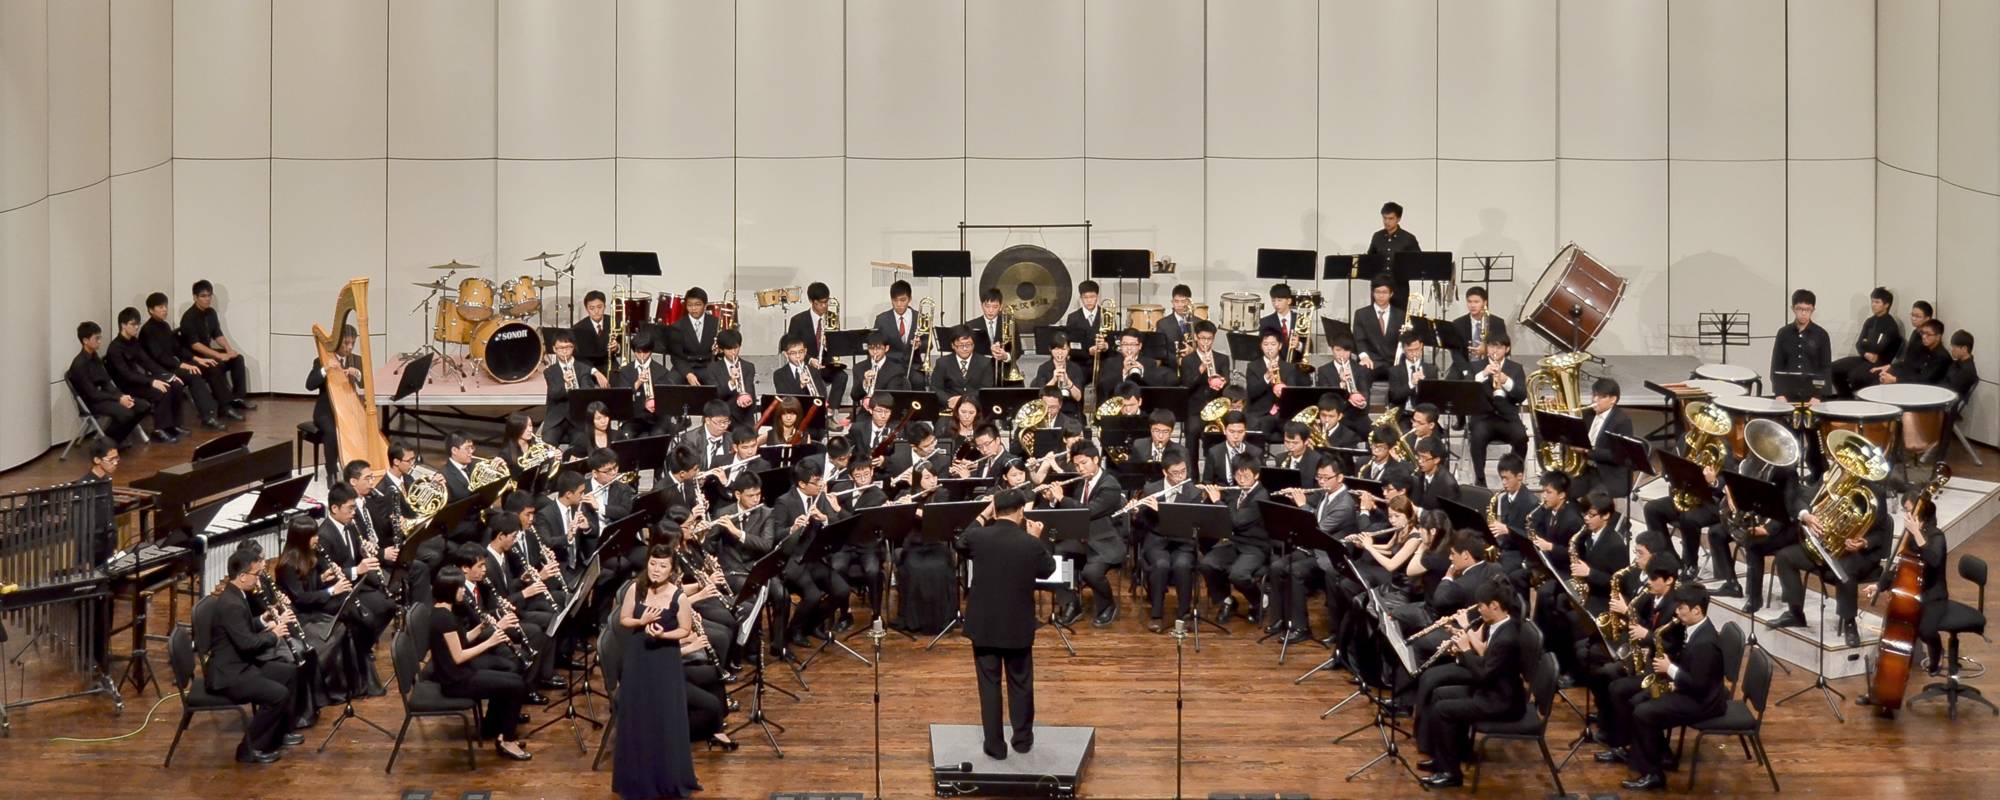 Kaohsiung Senior High School Wind Band & Kaohsiung Alumni Band 12th Annual Joint Concert